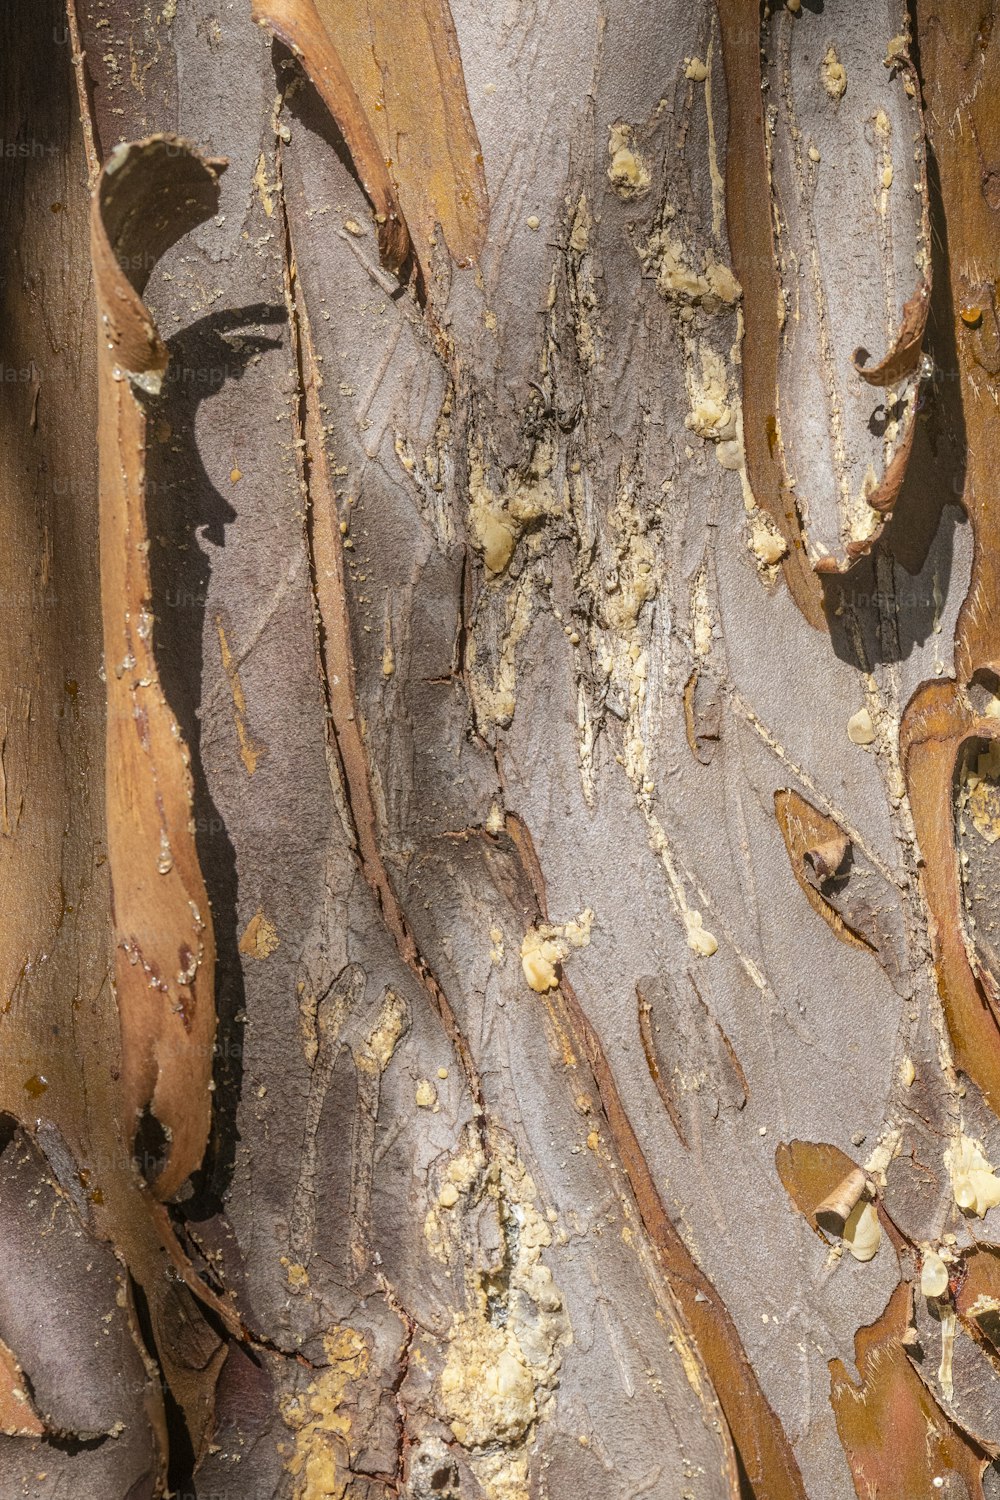 a close up of a tree trunk with peeling bark